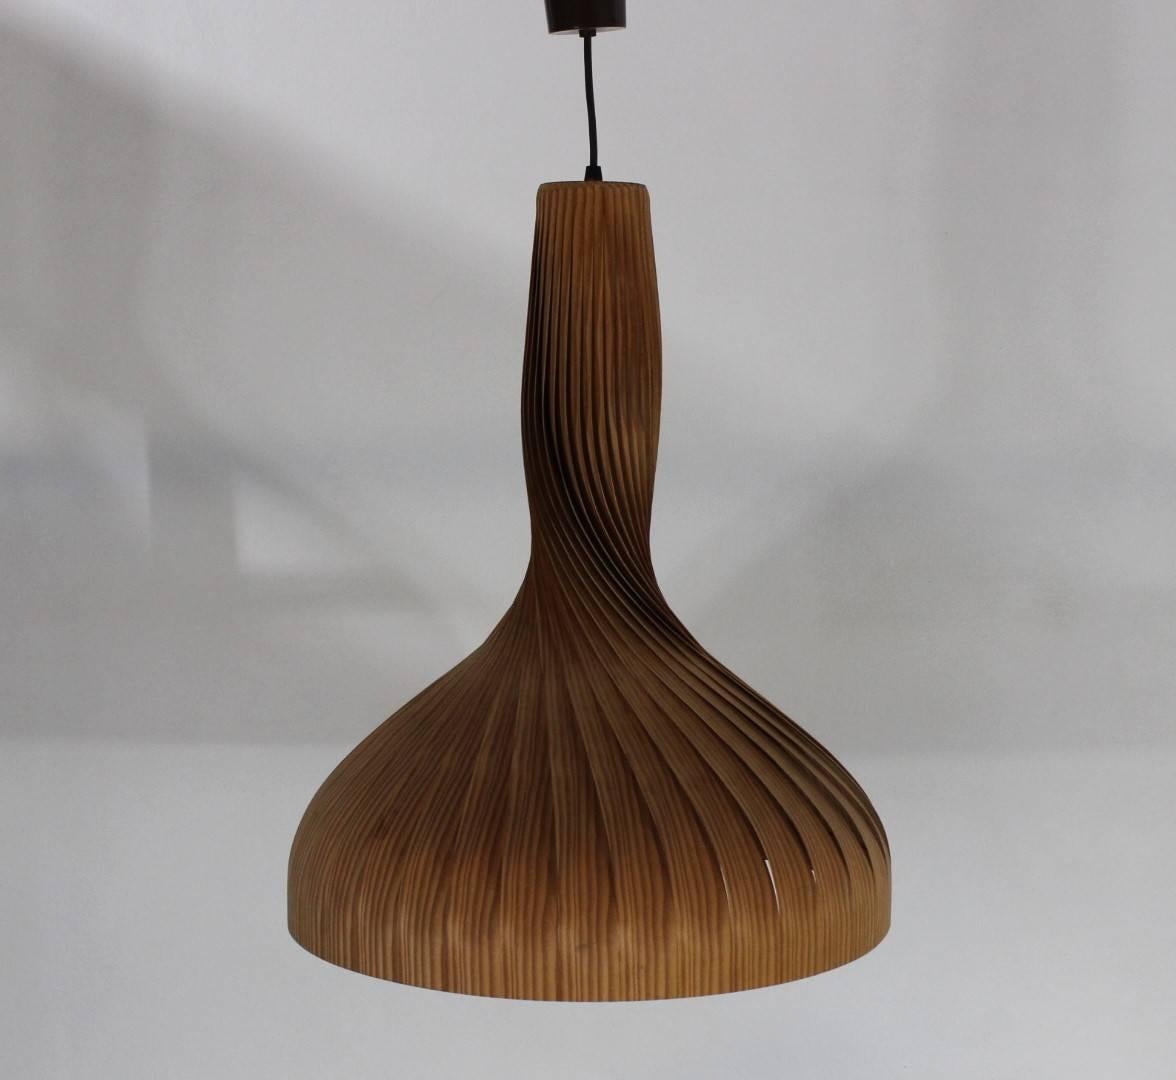 Pendant lamp from the 1960s, designed by Hans Agne Jakobsson, manufactured by Ellysett Markaryd. The lamp is made from of extremely thin pine wood lamellas, which allows the light to go through and produces a beautiful warm light.